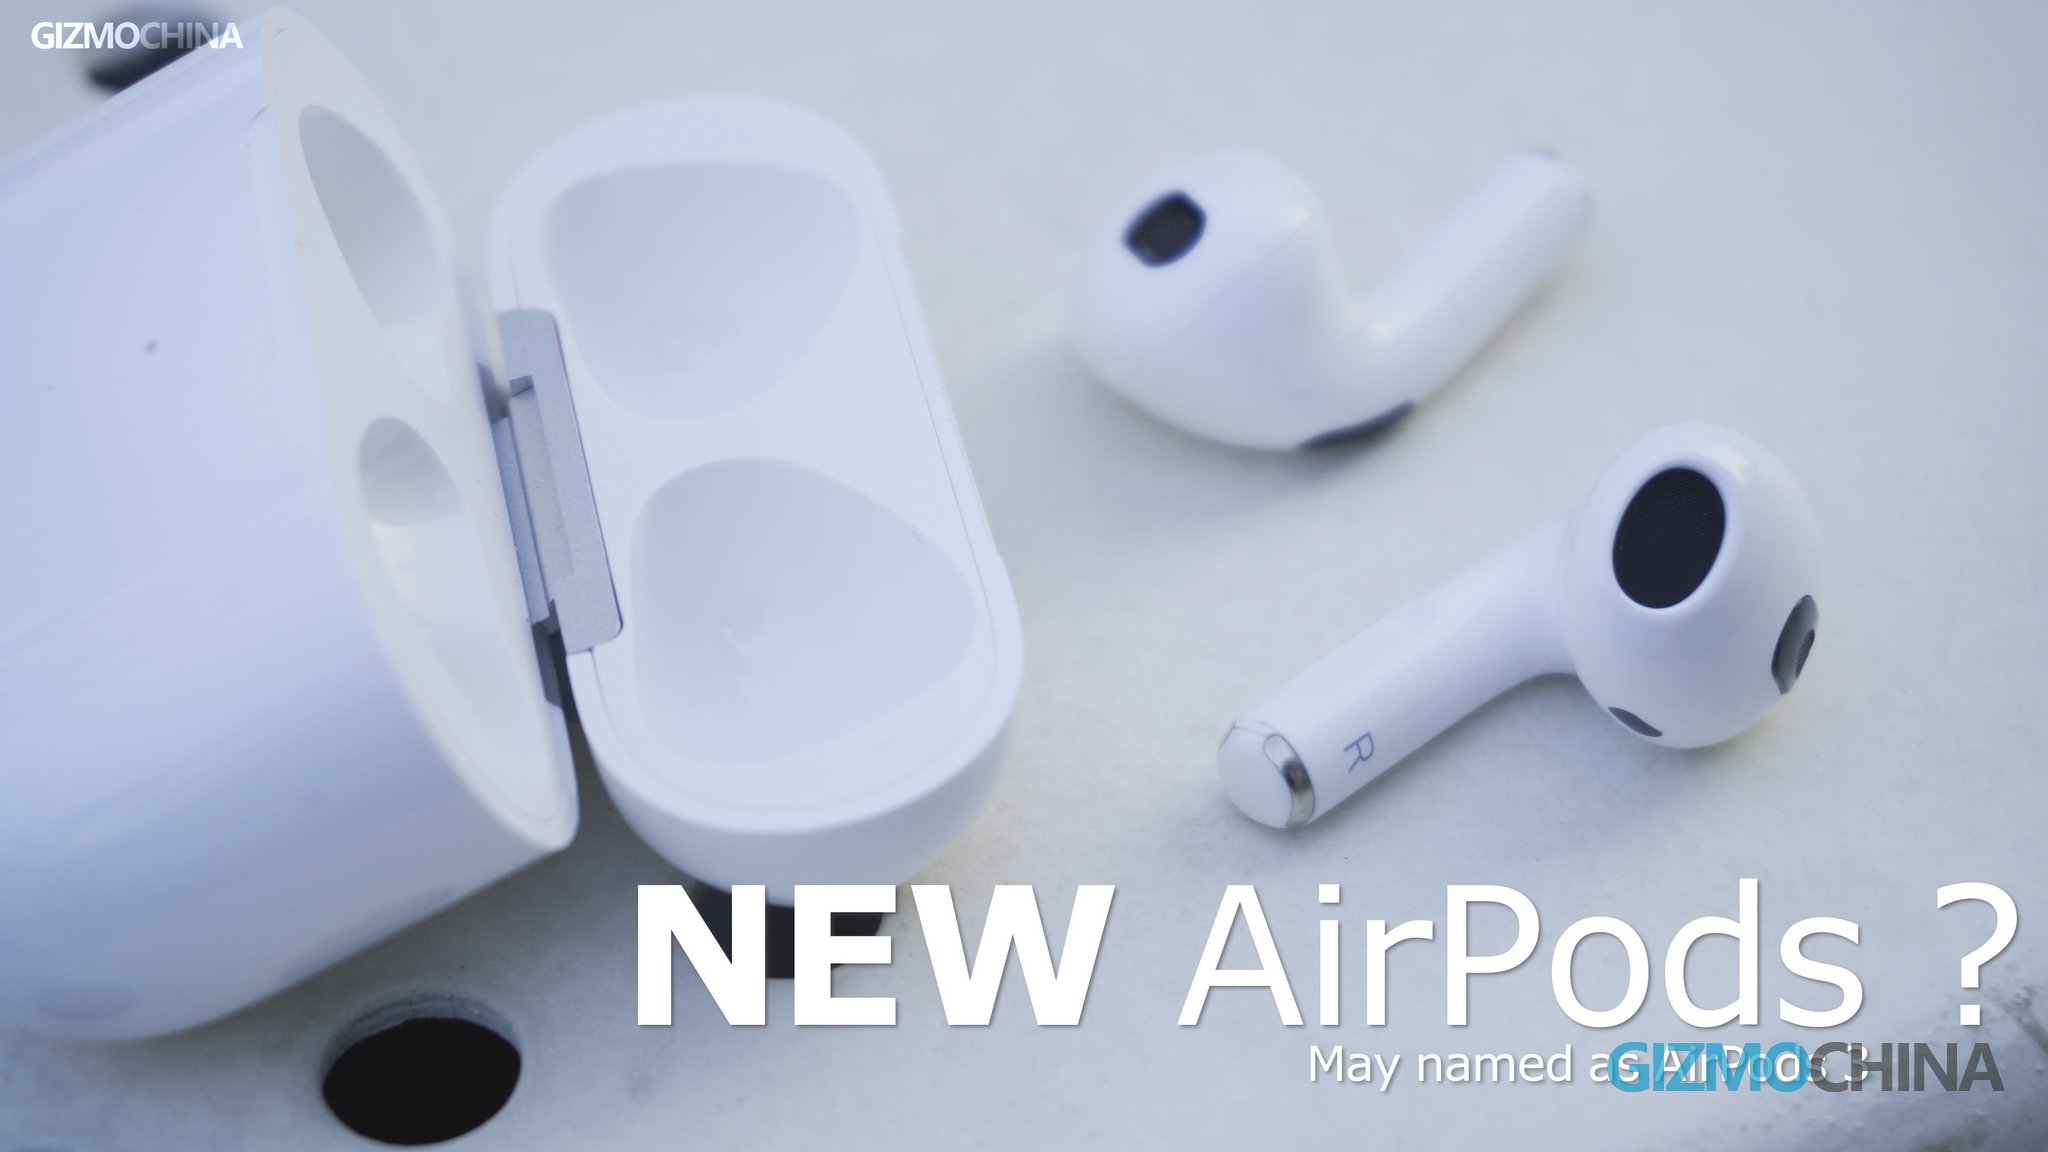 Apple Airpods 3 Clone Hands-on: A closer look at the new AirPods design